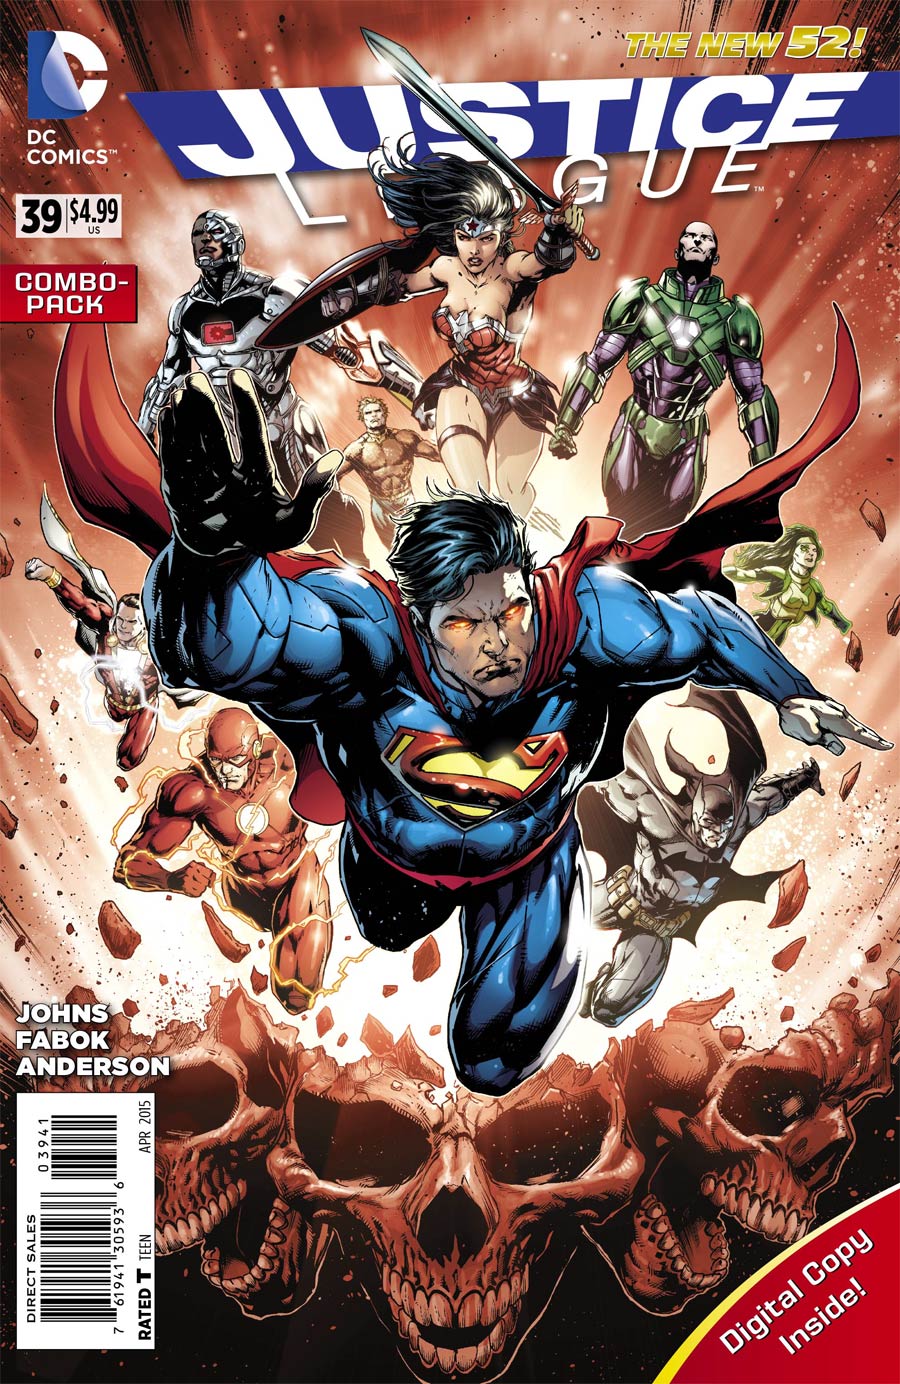 Justice League Vol 2 #39 Cover D Combo Pack Without Polybag